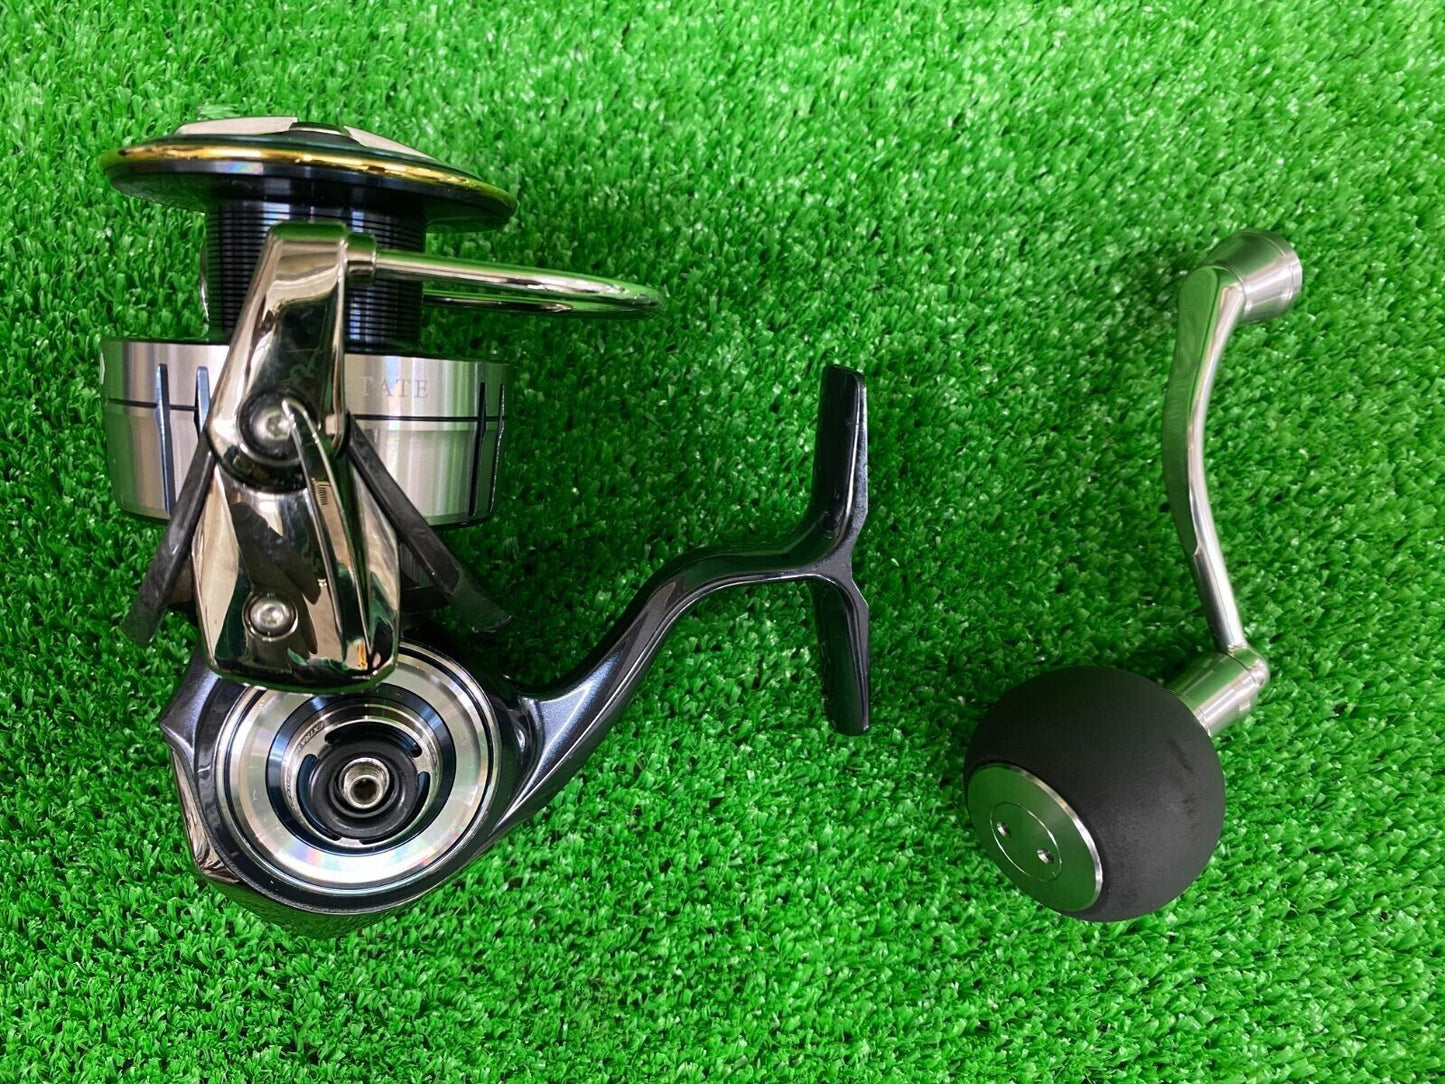 Daiwa 19 CERTATE LT 5000D-CXH Spinning Reel Gear Ratio 6.2:1 F/S from Japan